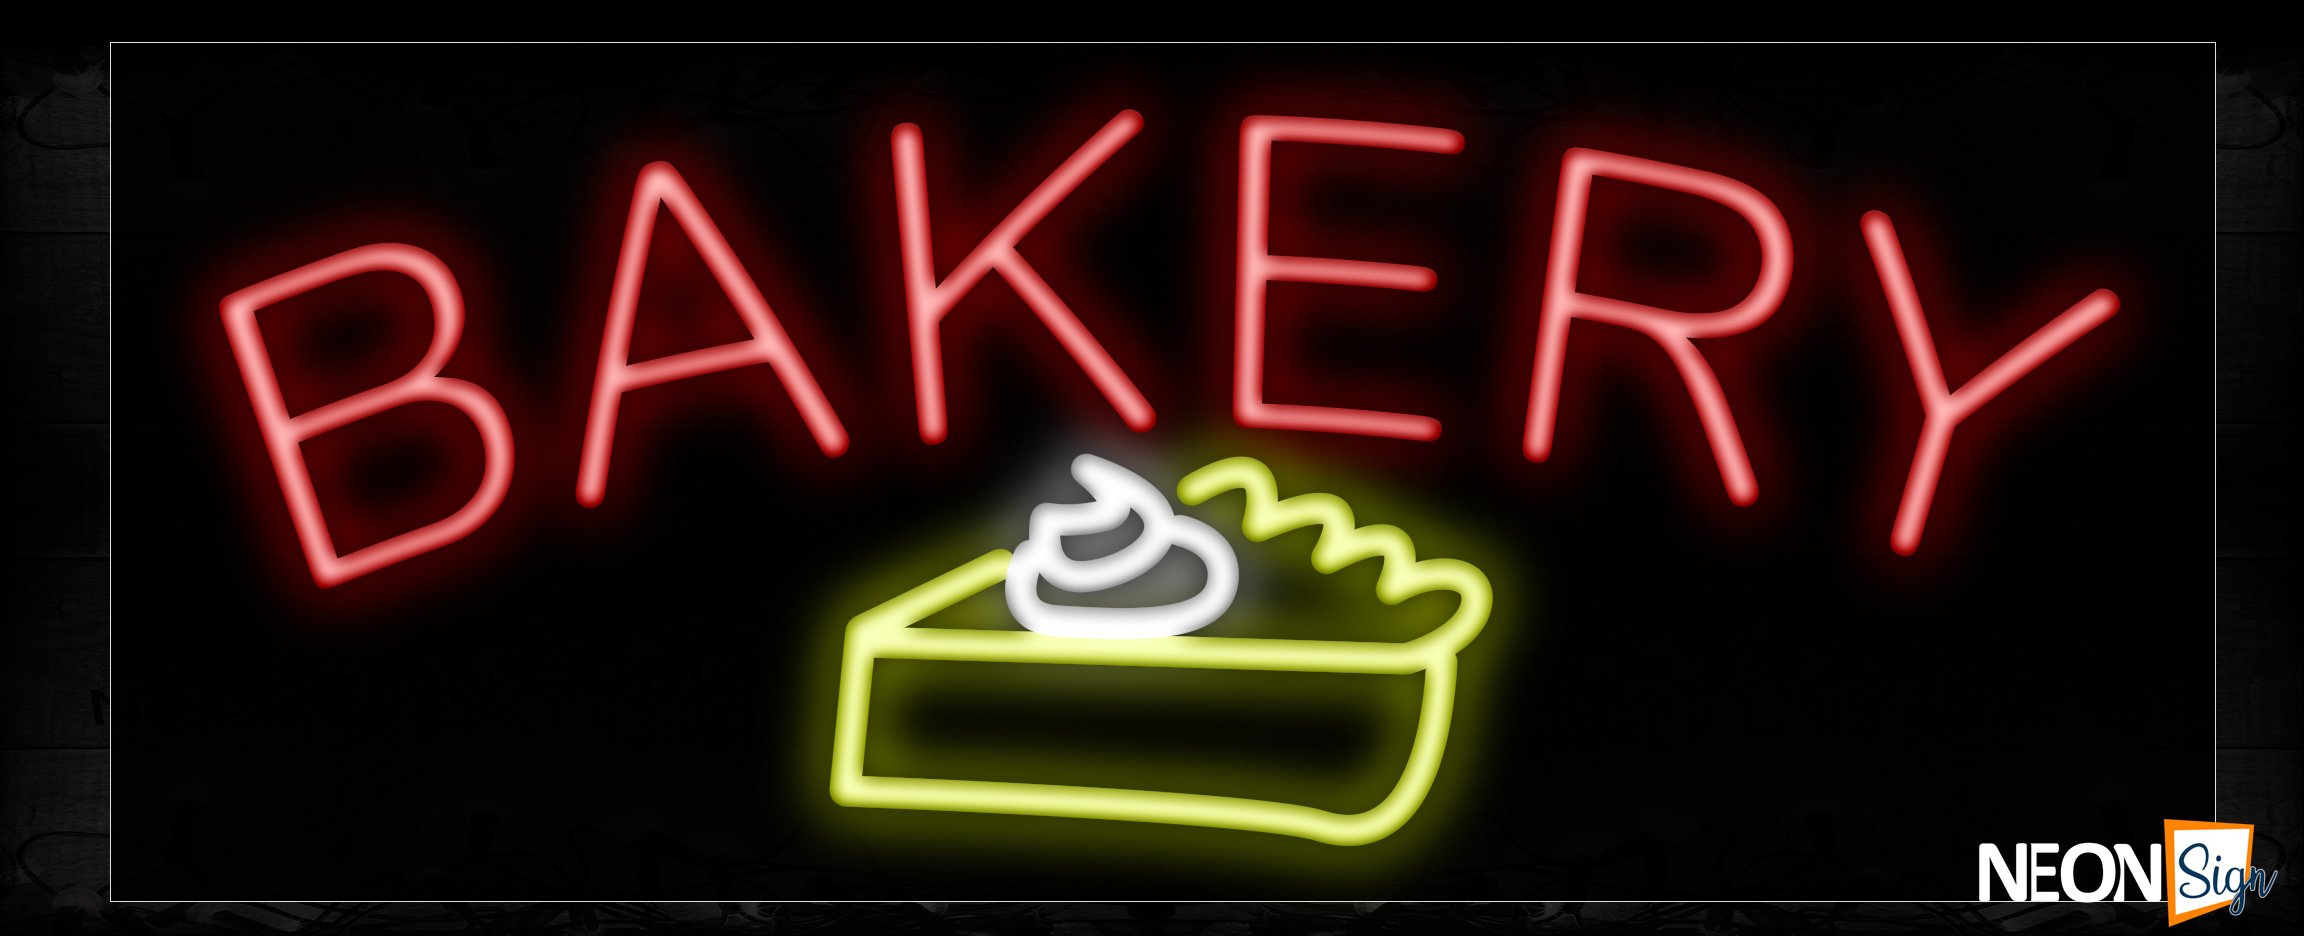 Image of 10015 Bakery with pie logo Neon Sign_13x32 Black Backing